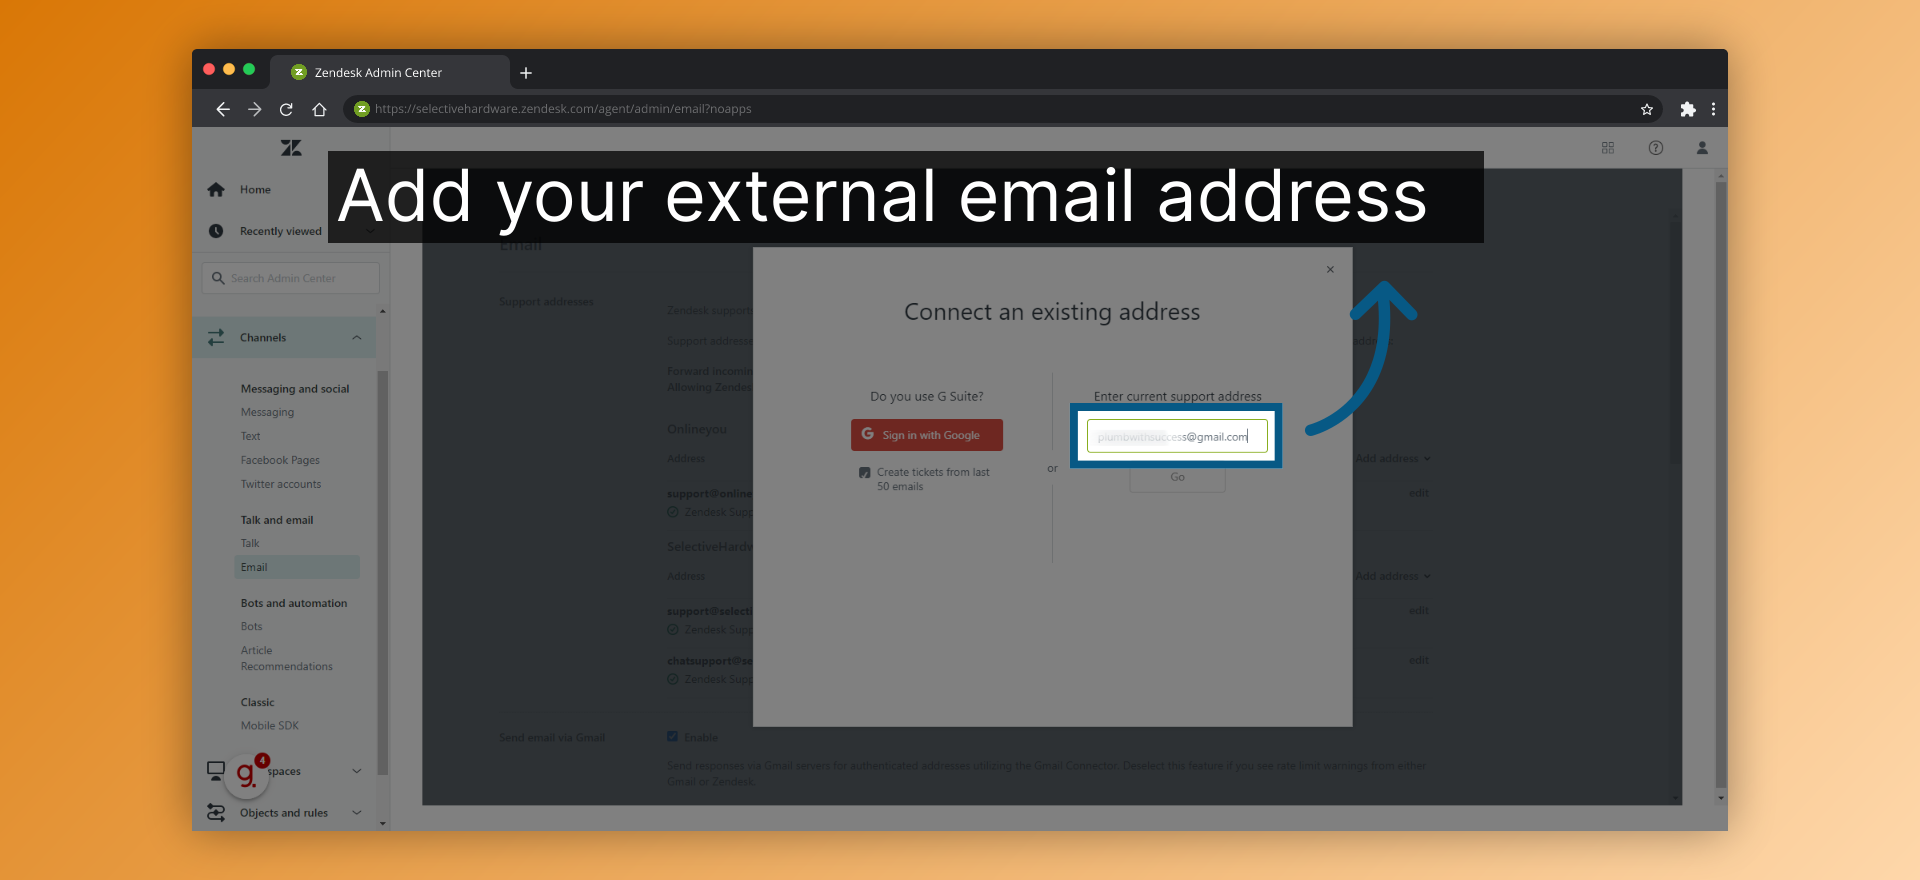 Add your external email address